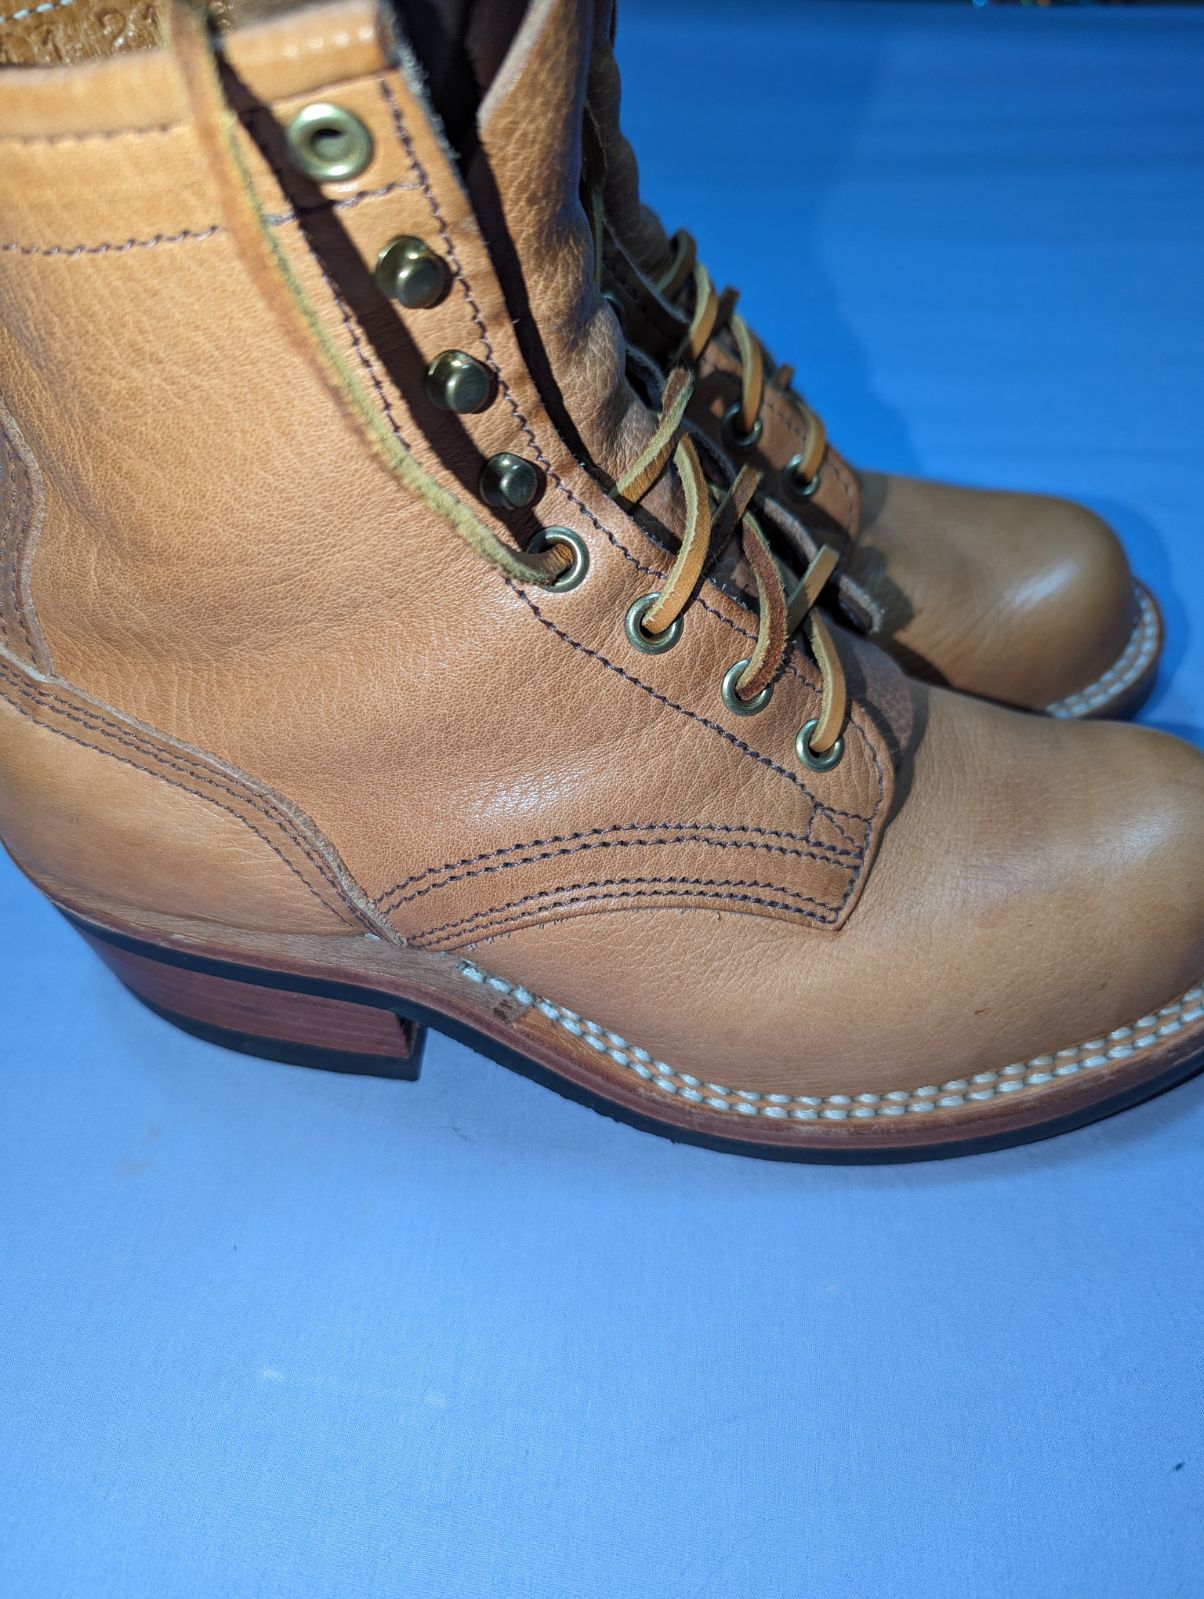 Nick's Robert Boots in W&C Milled Russet Harness, 6.5FF